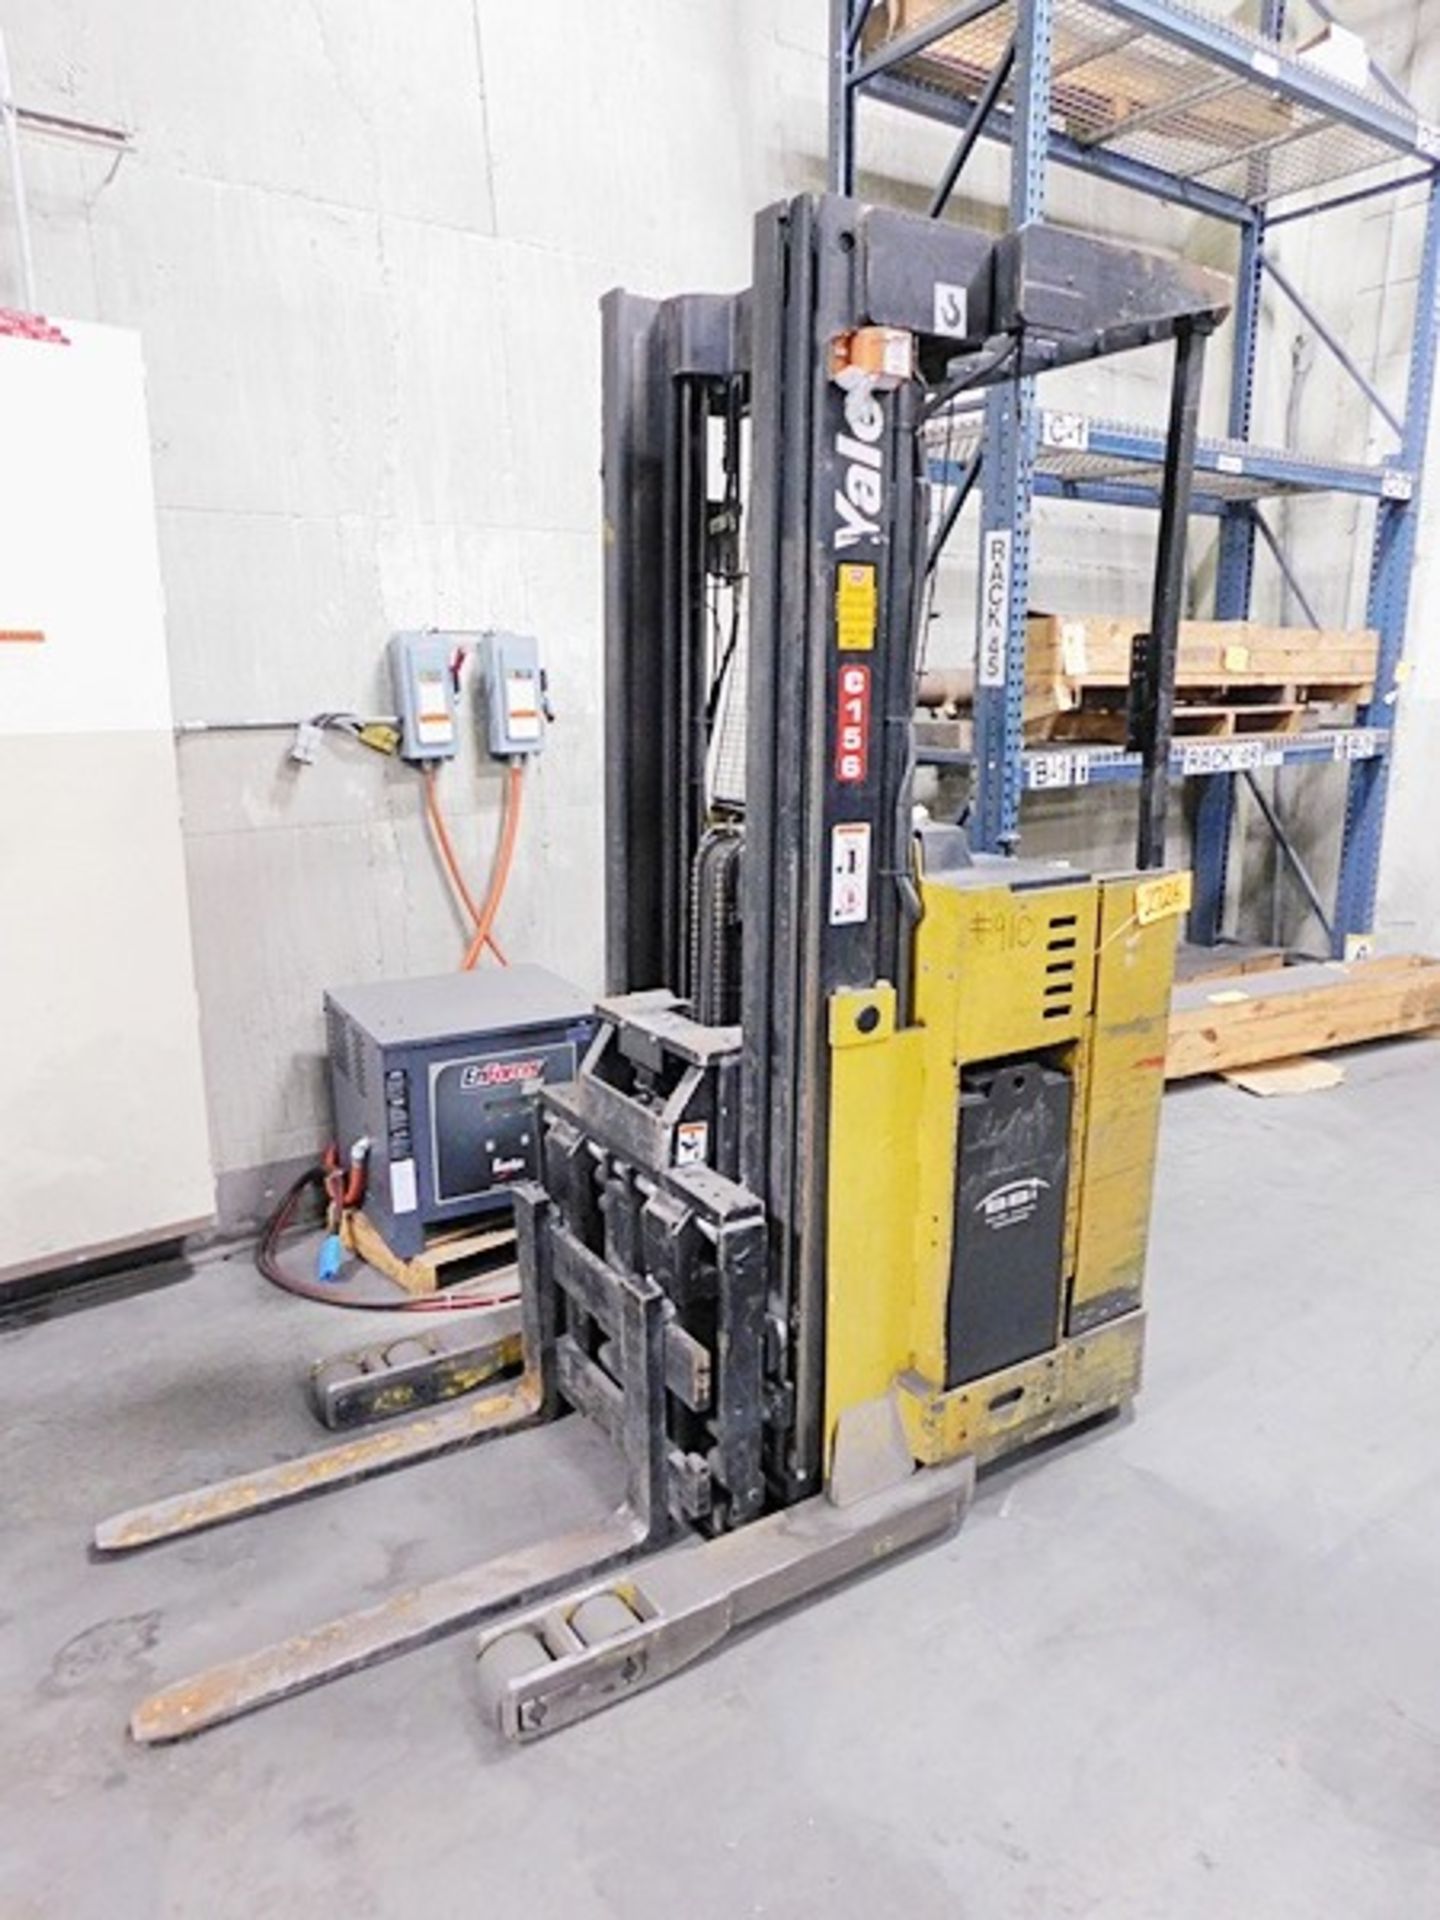 Yale Model NR035ABNS24se095 3500 lb Capacity Stand Up Forklift with New Battery, Charger, sn: